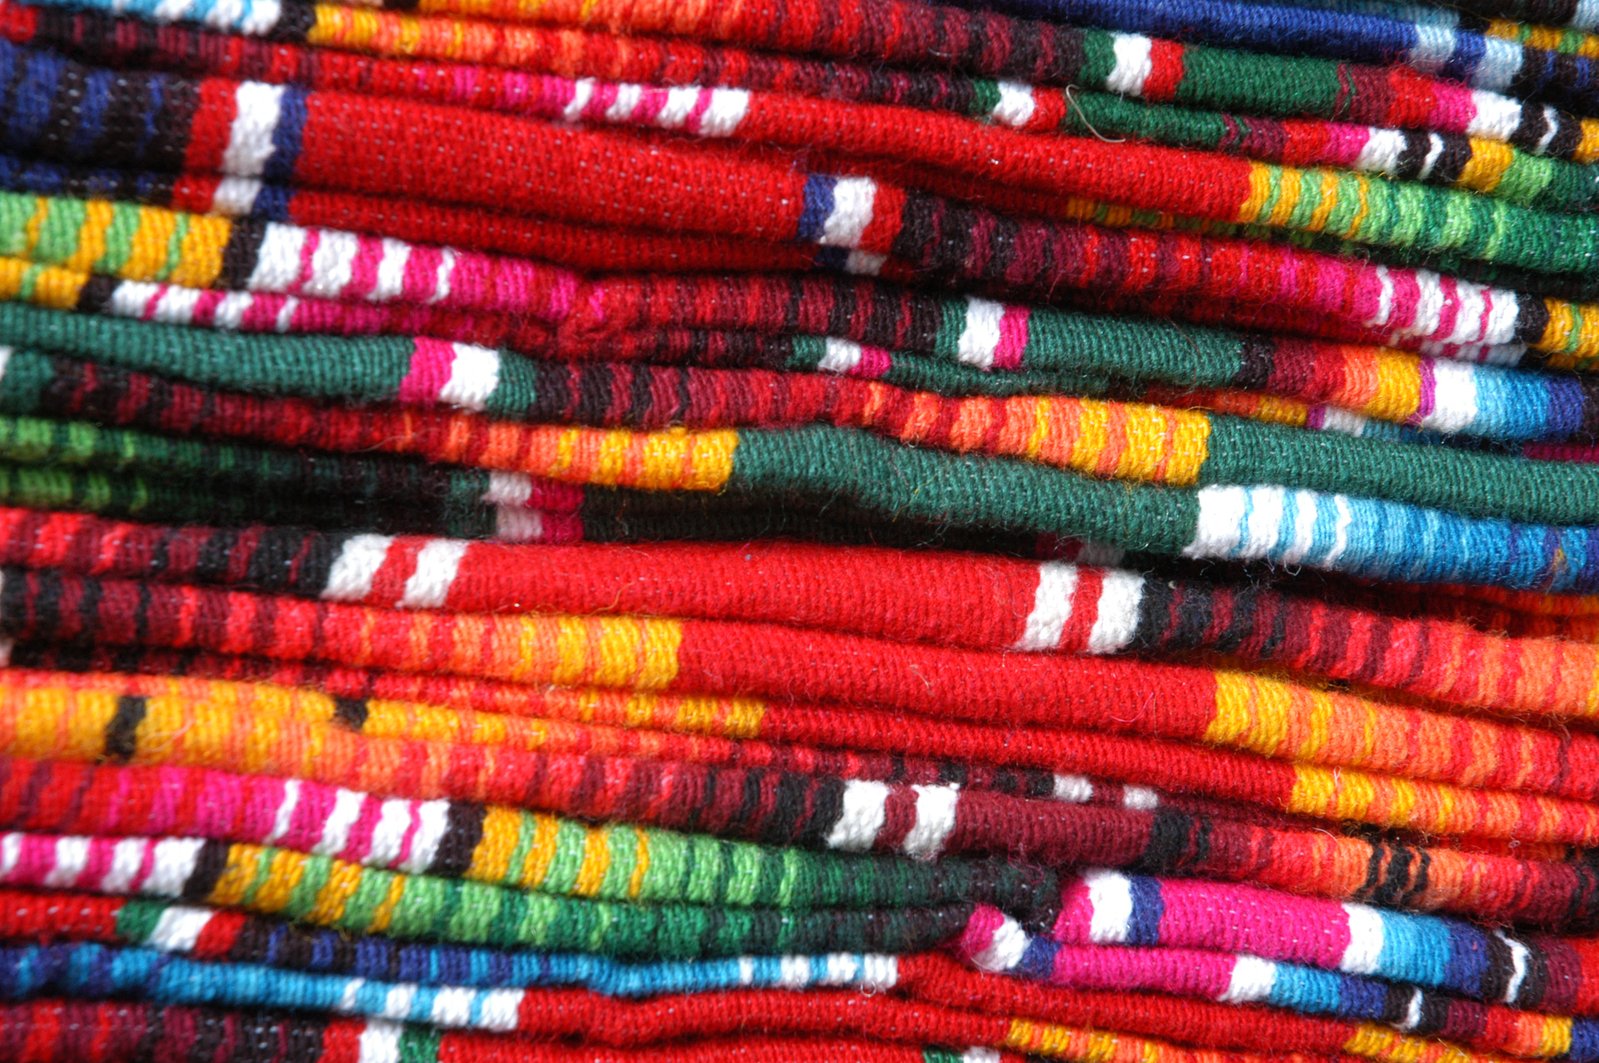 many colorful cloths that have been folded together